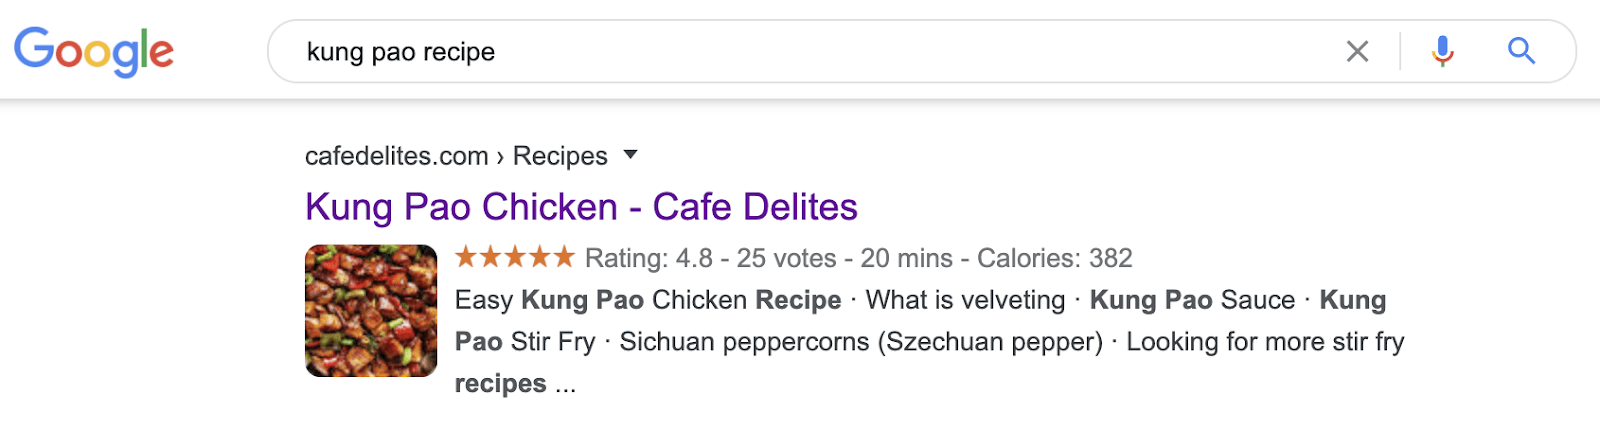 16 kung pao rich snippets